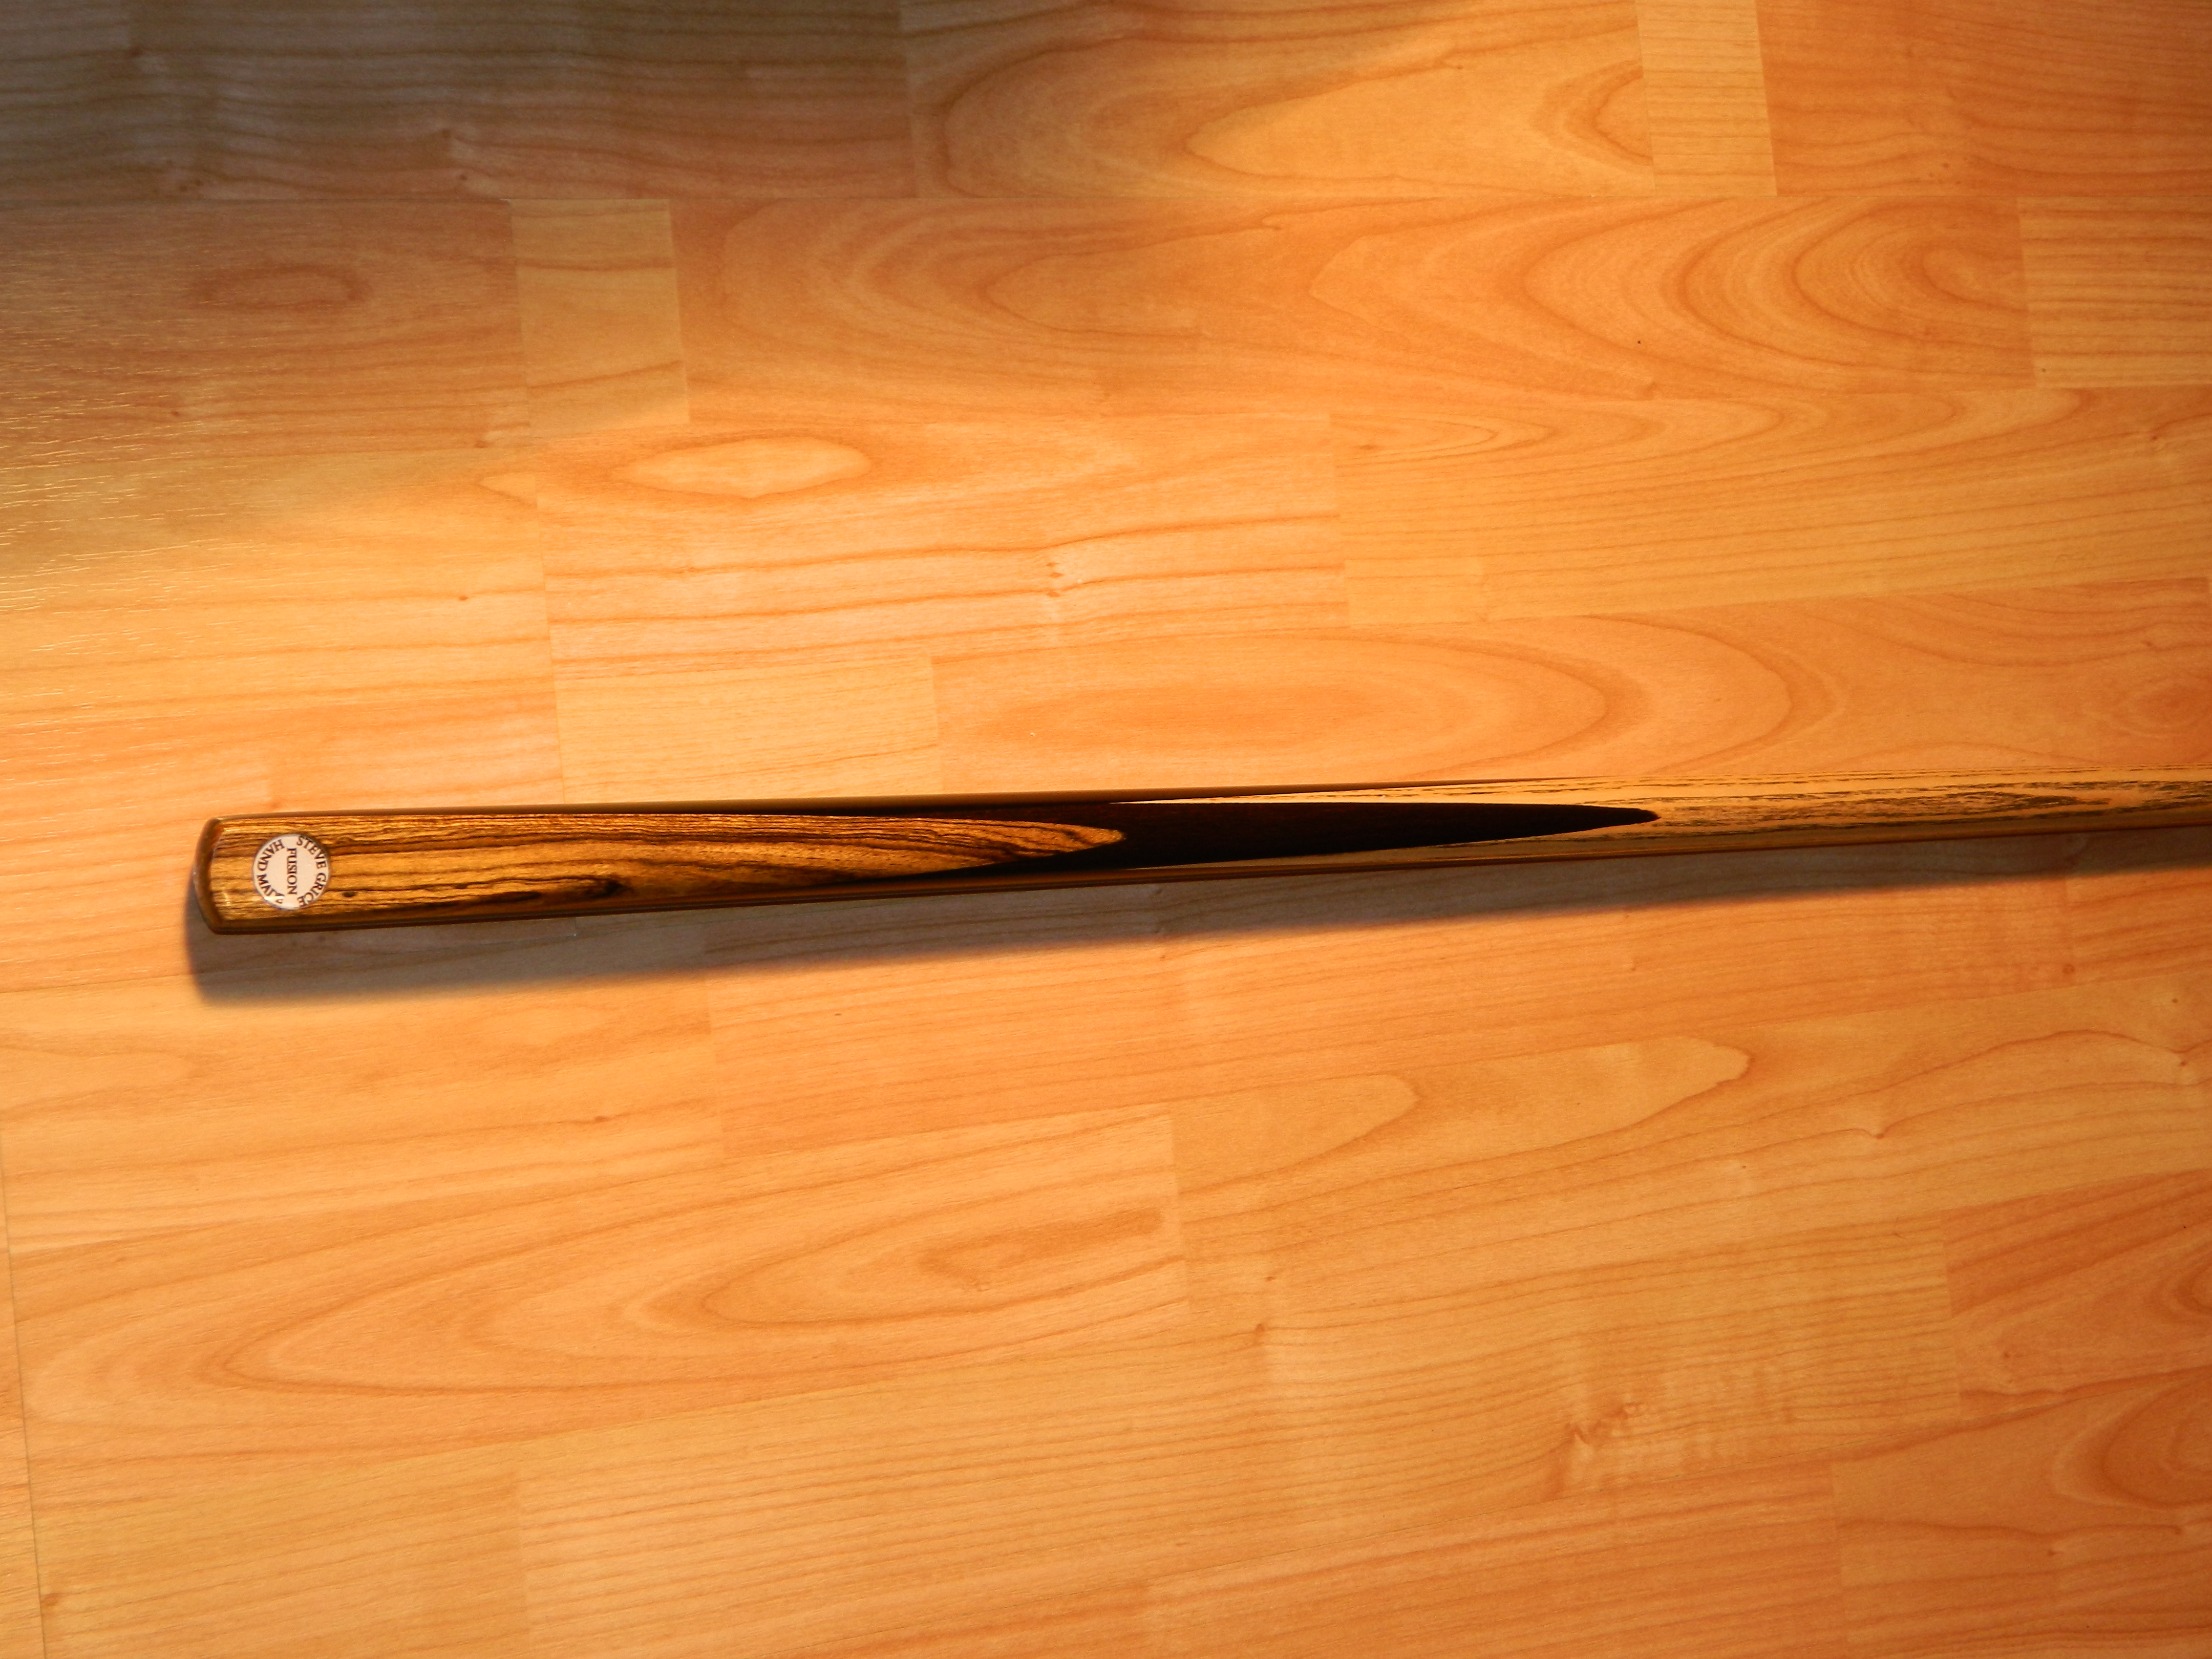  Steve Grice Fusion  cue an exotic front wedge  on a hand spliced ebony butt.